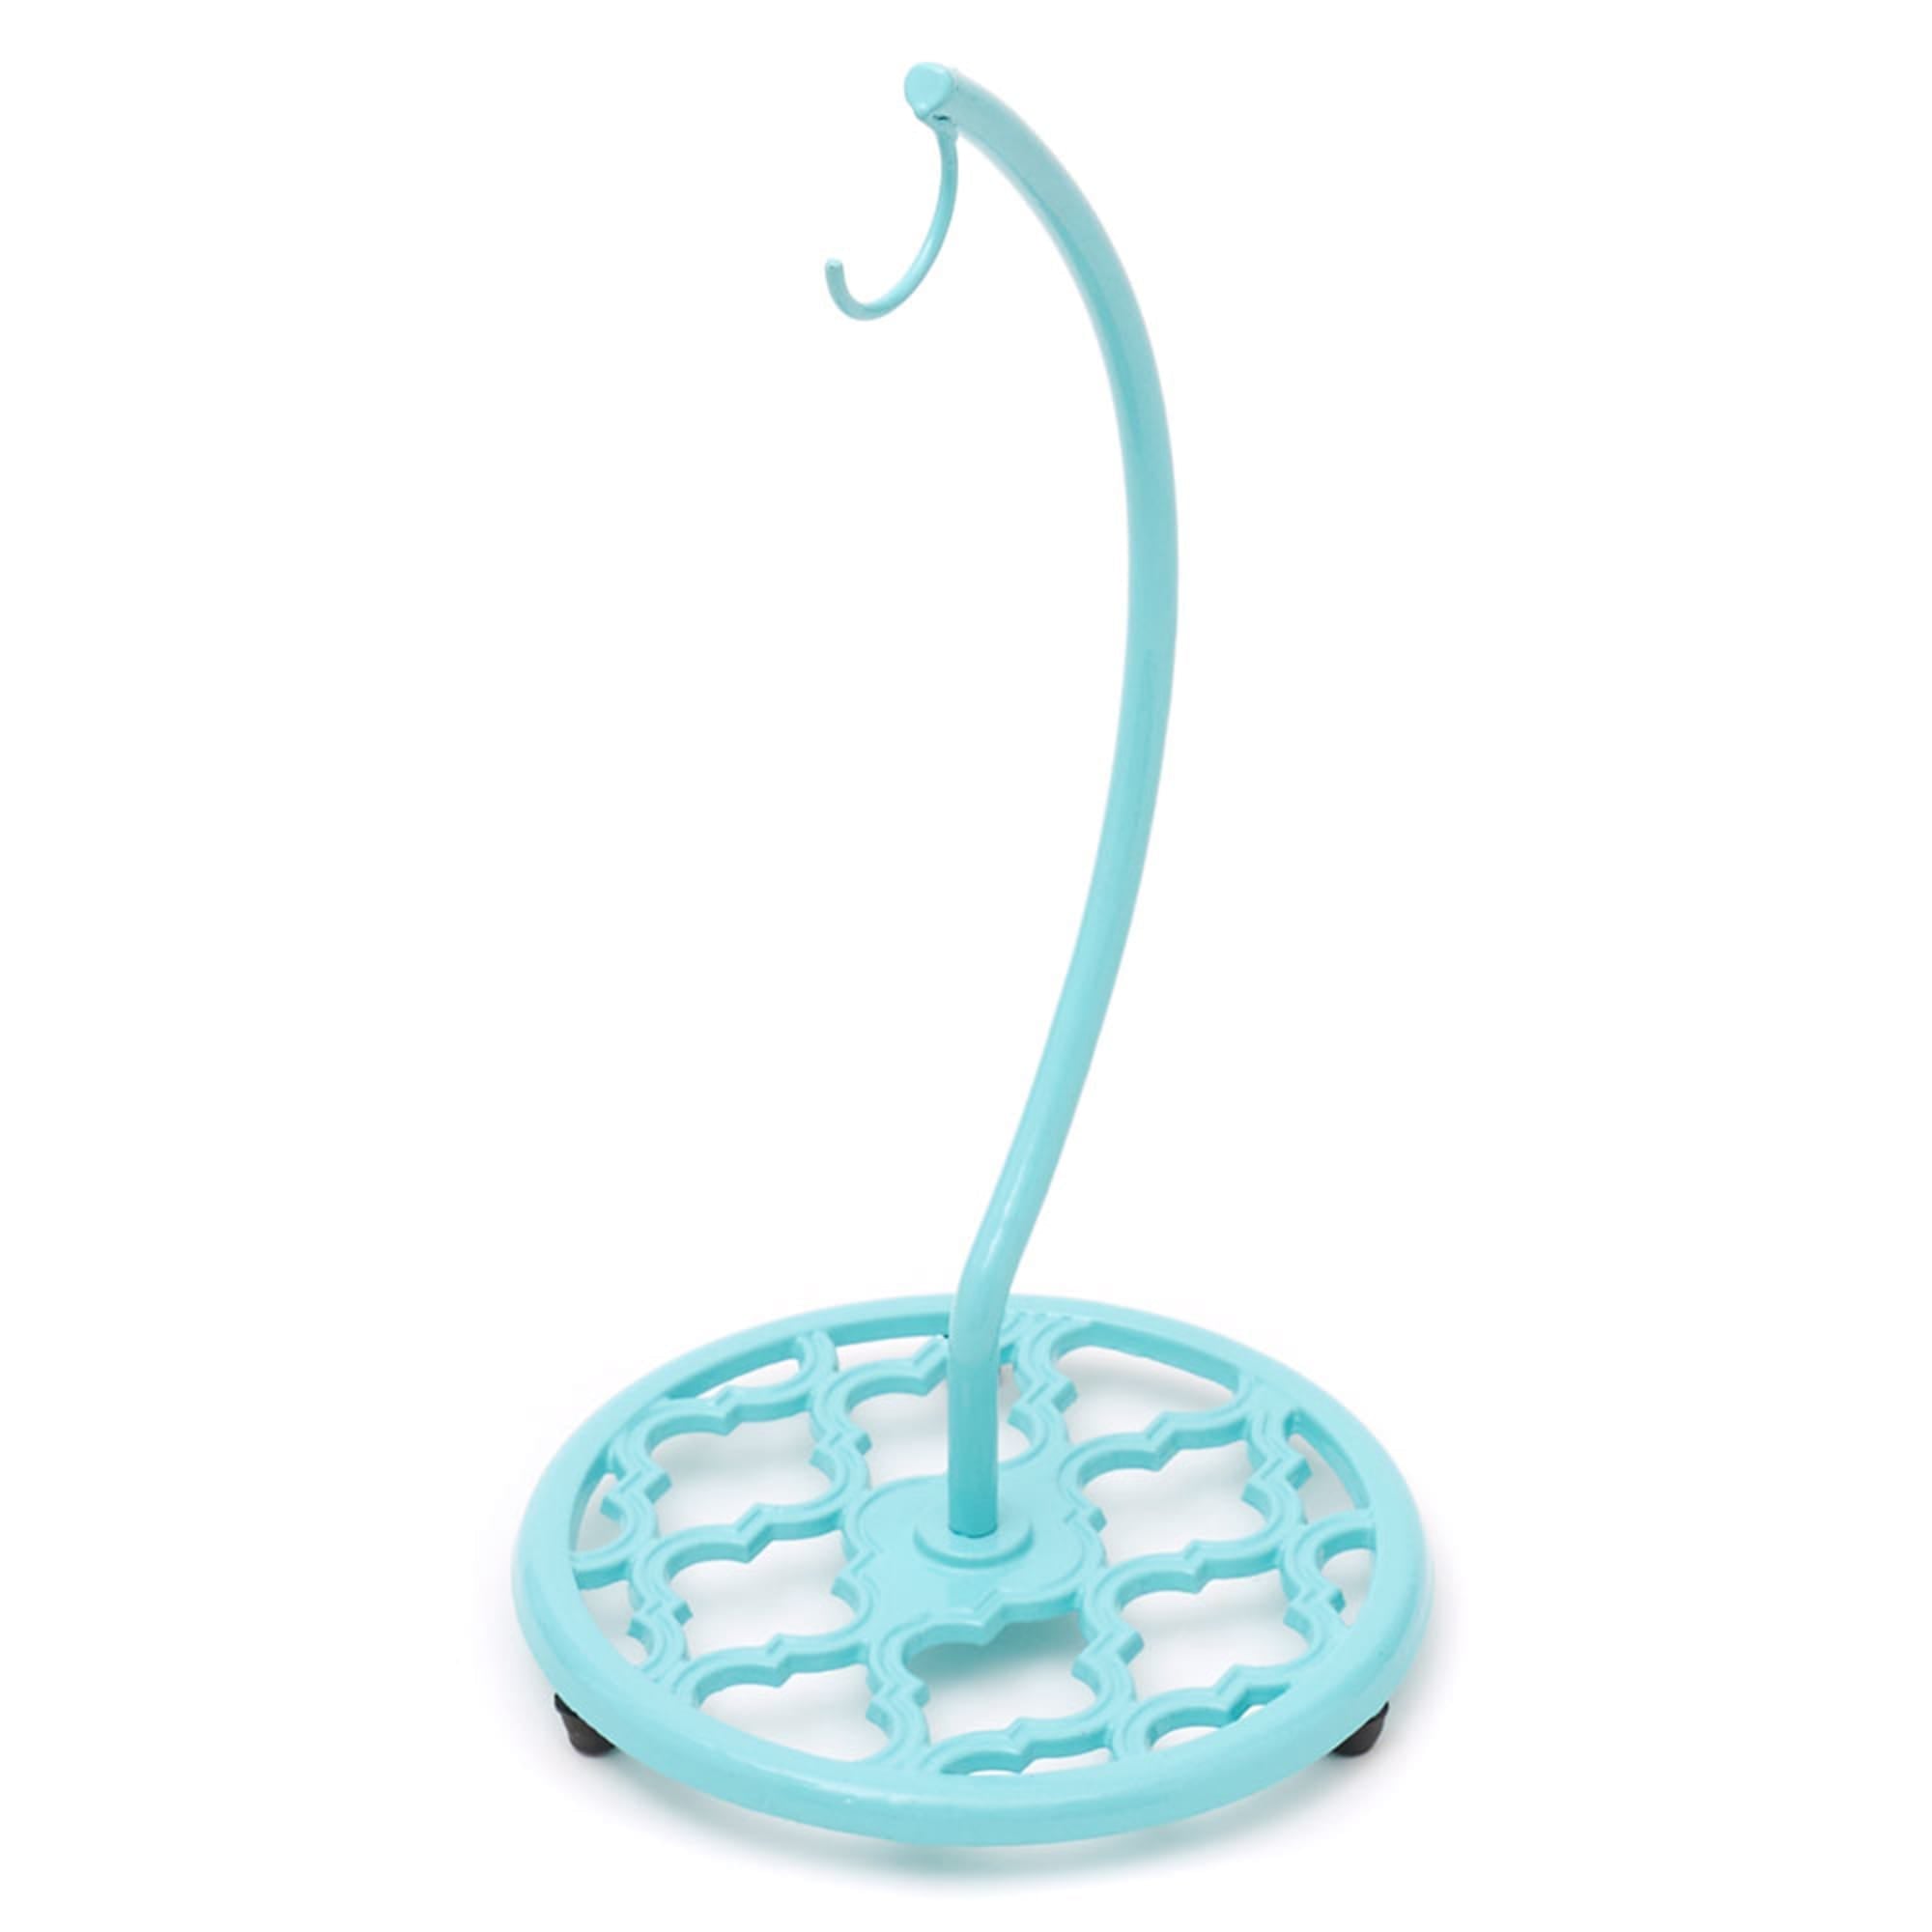 Home Basics Lattice Collection Cast Iron Banana Hanger, Turquoise $10.00 EACH, CASE PACK OF 6